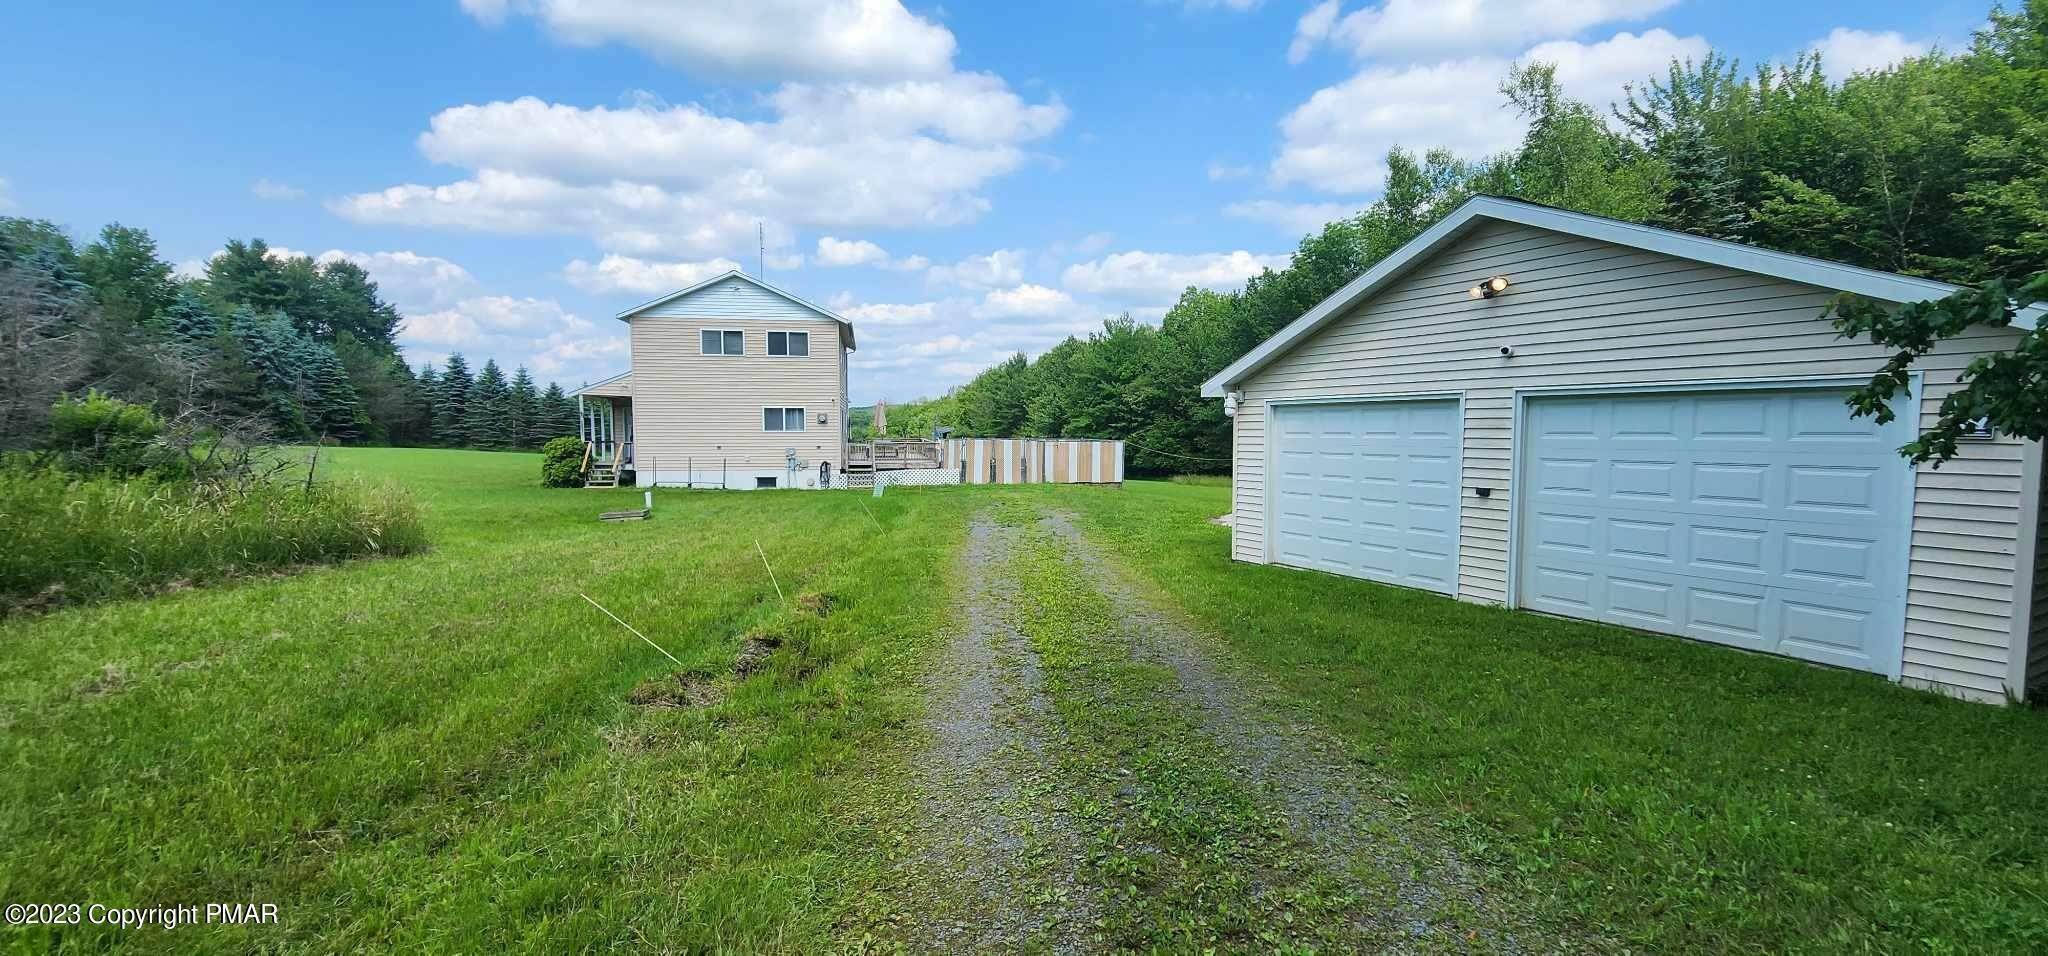 56. Single Family Homes for Sale at 5 Poplar Road Pleasant Mount, Pennsylvania 18453 United States